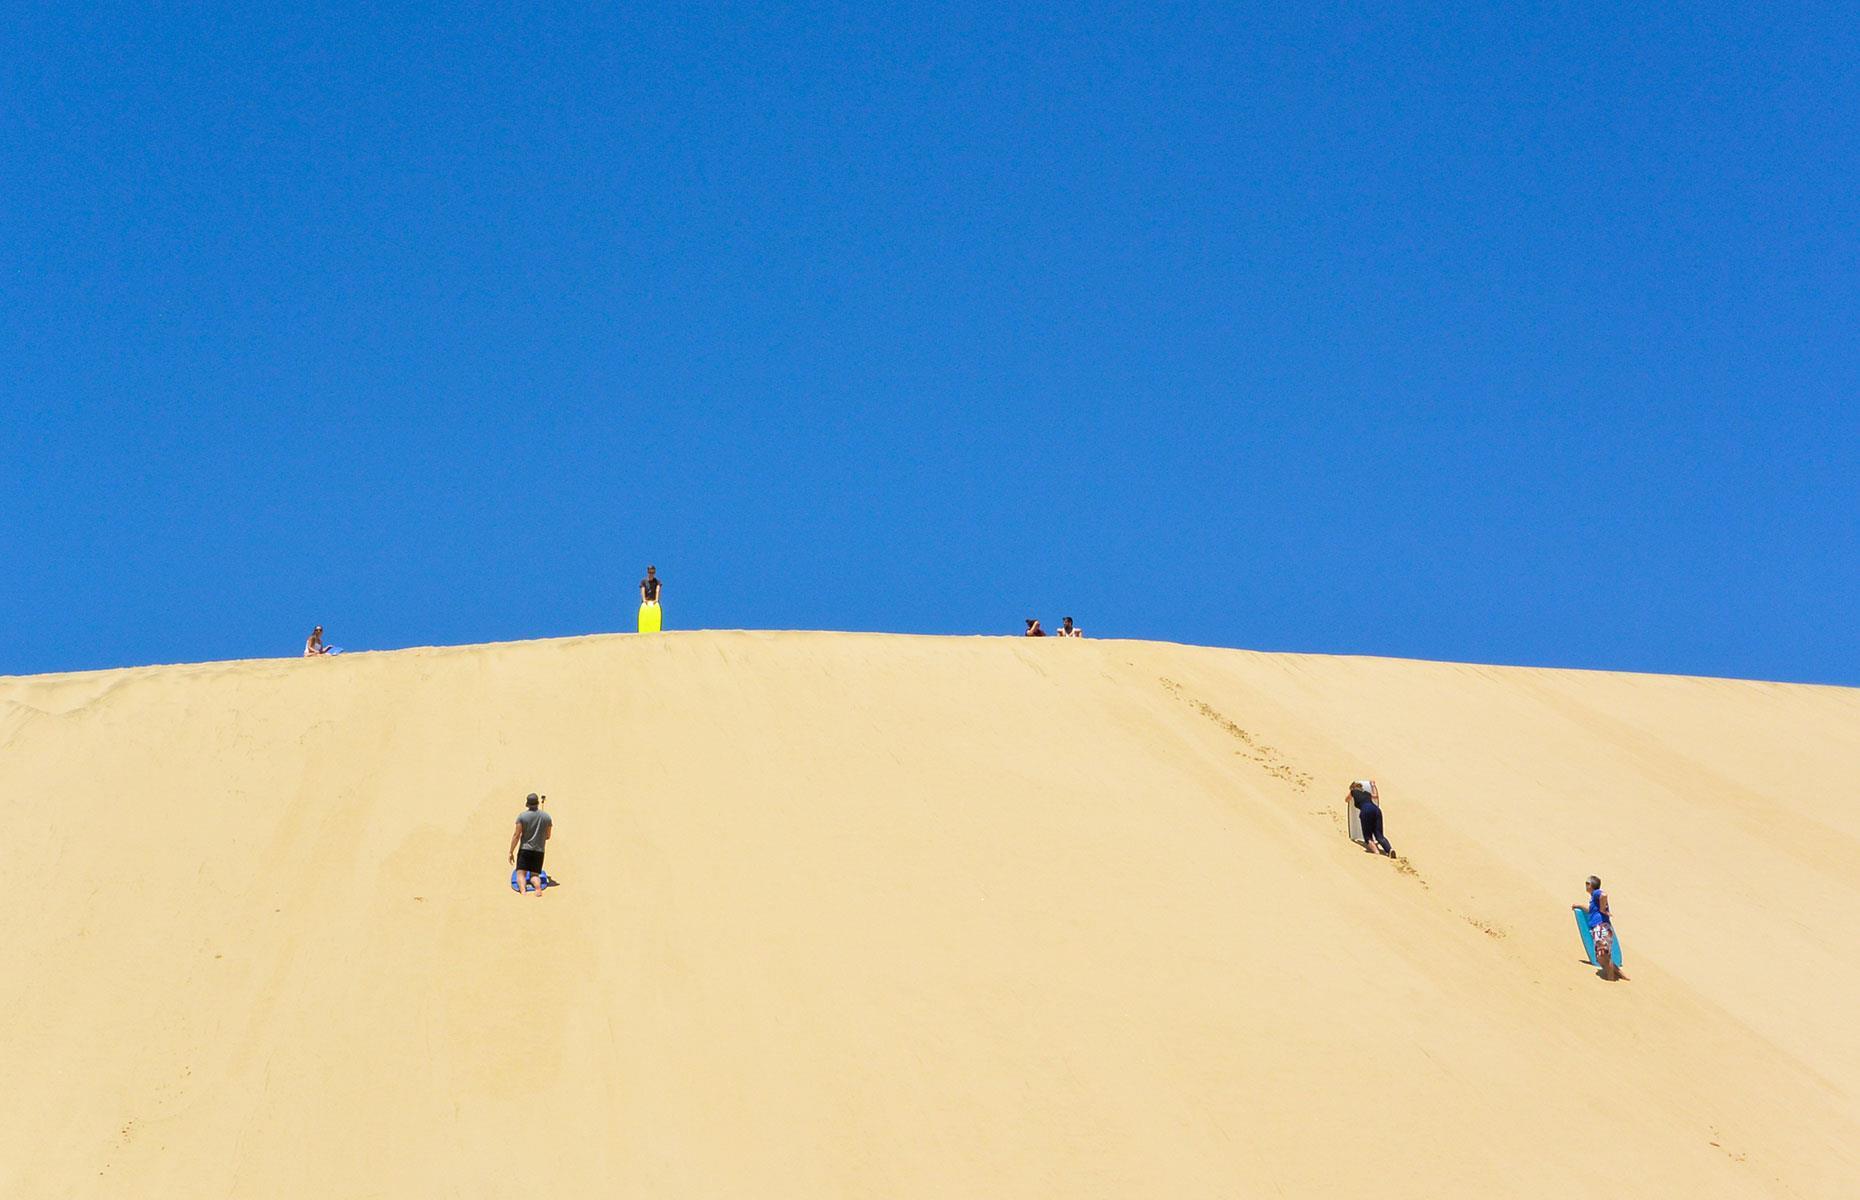 Sandboarding on New Zealand’s Giant Sand Dunes is some of the best fun you’ll have on a trip to New Zealand. Nowhere is better than the towering sand dunes in a recreational area, en route to Cape Reinga in the far north of the North Island. Boards can be hired in the parking lot and you walk them up to the top of the slope before speeding down on your belly.